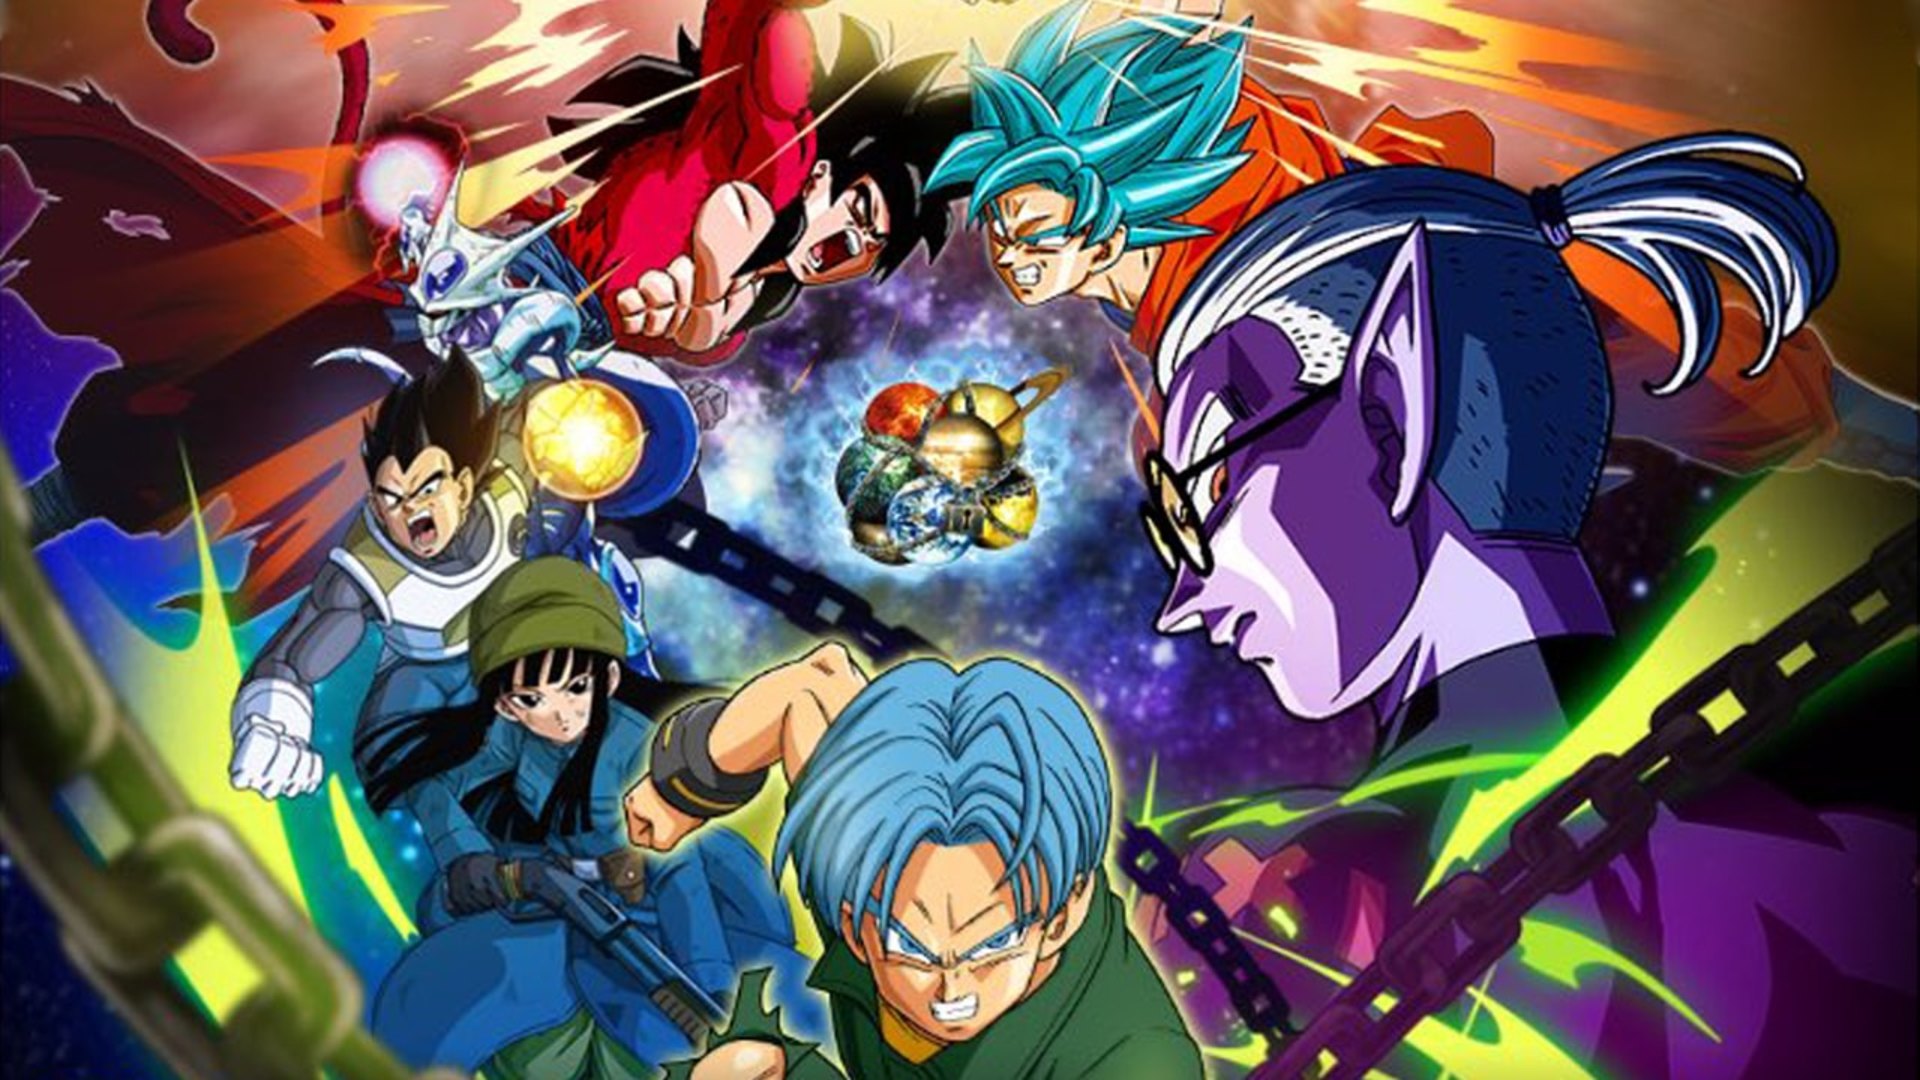 Super Dragon Ball Heroes countdown - how many days until the next episode